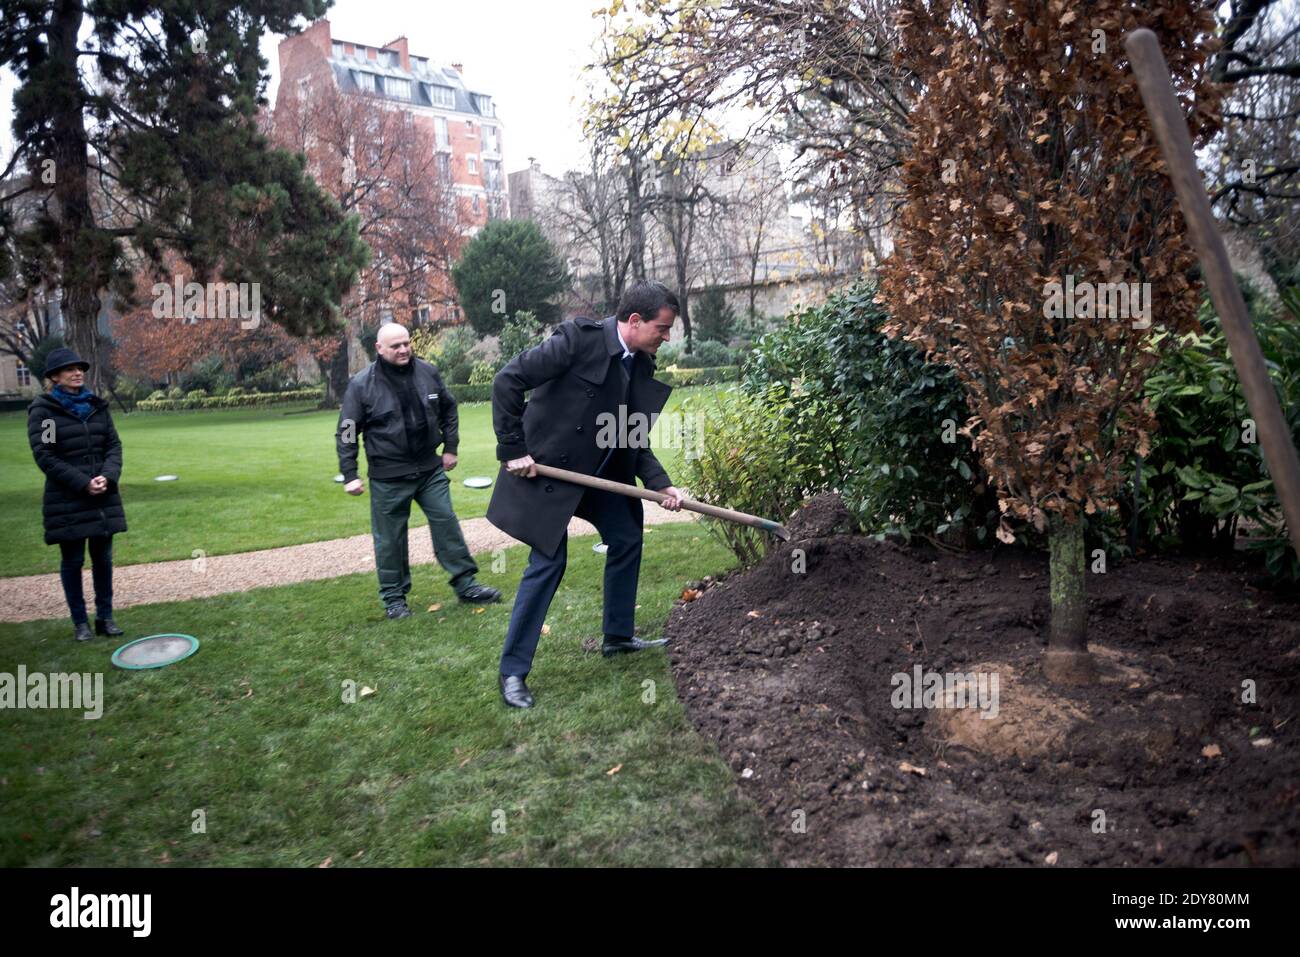 French Prime Minister Manuel Valls - as is the republican tradition - plants the tree called 'of the Prime Minister' watched by his wife Anne Gravoin in the gardens of his headquarters Hotel de Matignon in Paris, France on December 16, 2014. The tree, chosen by the Prime Minister, is an oak of the species 'Quercus robur fastigiata' and is located on the front lawn. The tradition of planting a tree at the PM's headquarters was introduced by the late Prime Minister Raymond Barre in 1978. Photo Pool by Nicolas Messyasz/ABACAPRESS.COM Stock Photo